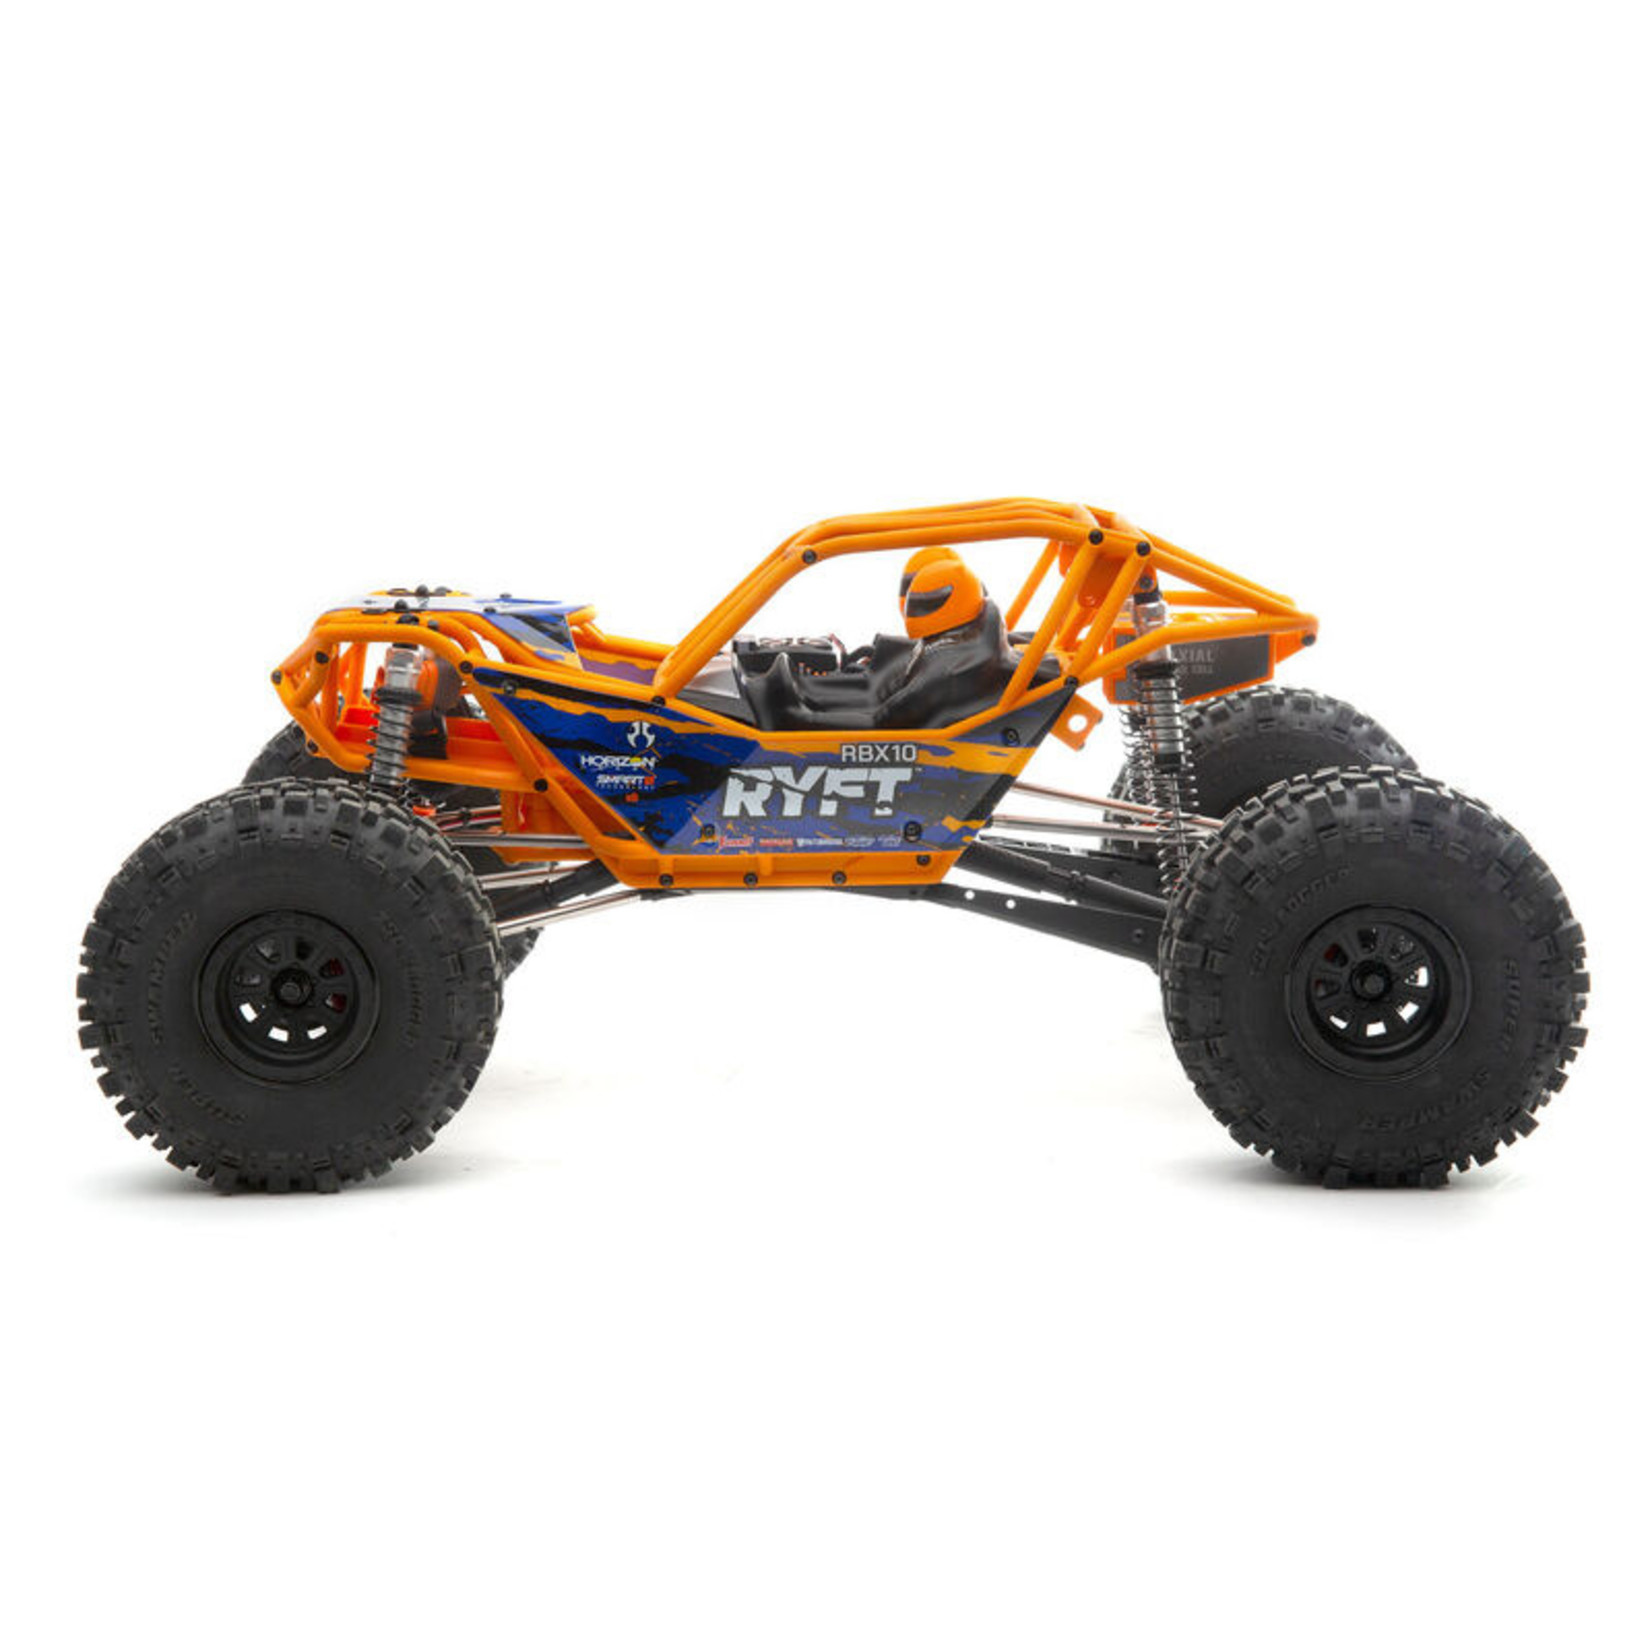 Axial Racing AXI03005T2 1/10 RBX10 Ryft 4WD Brushless Rock Bouncer RTR, Black